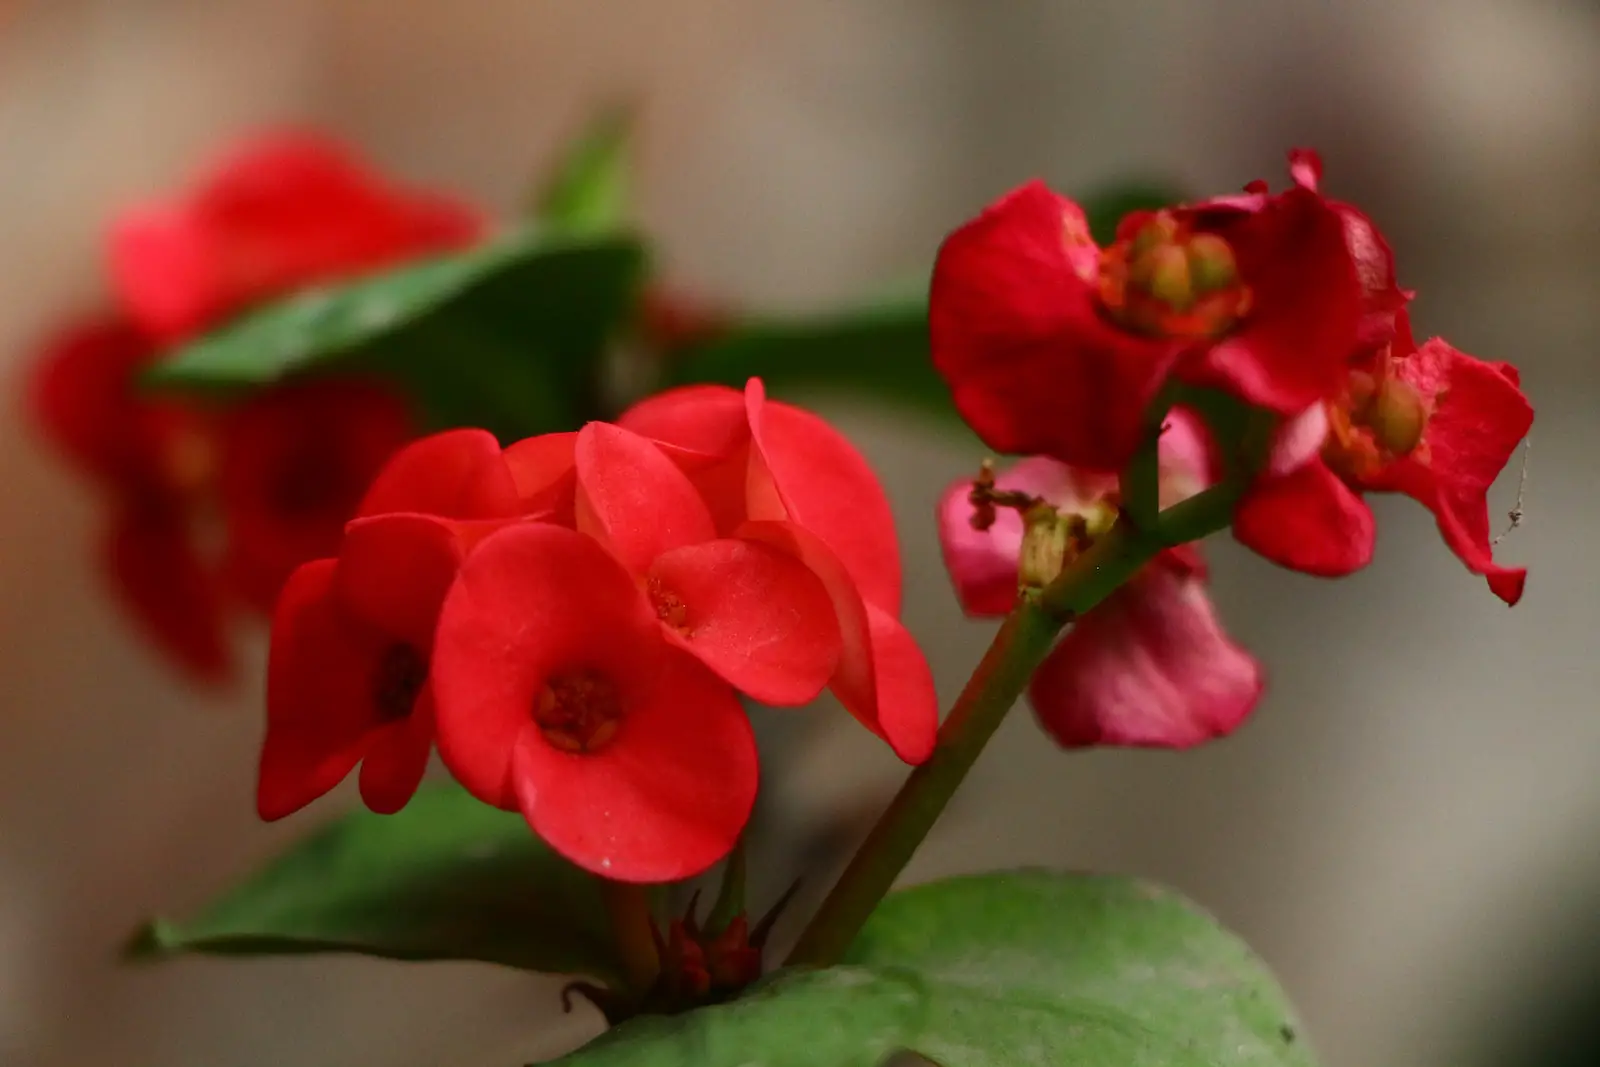 Crown Of Thorns plant